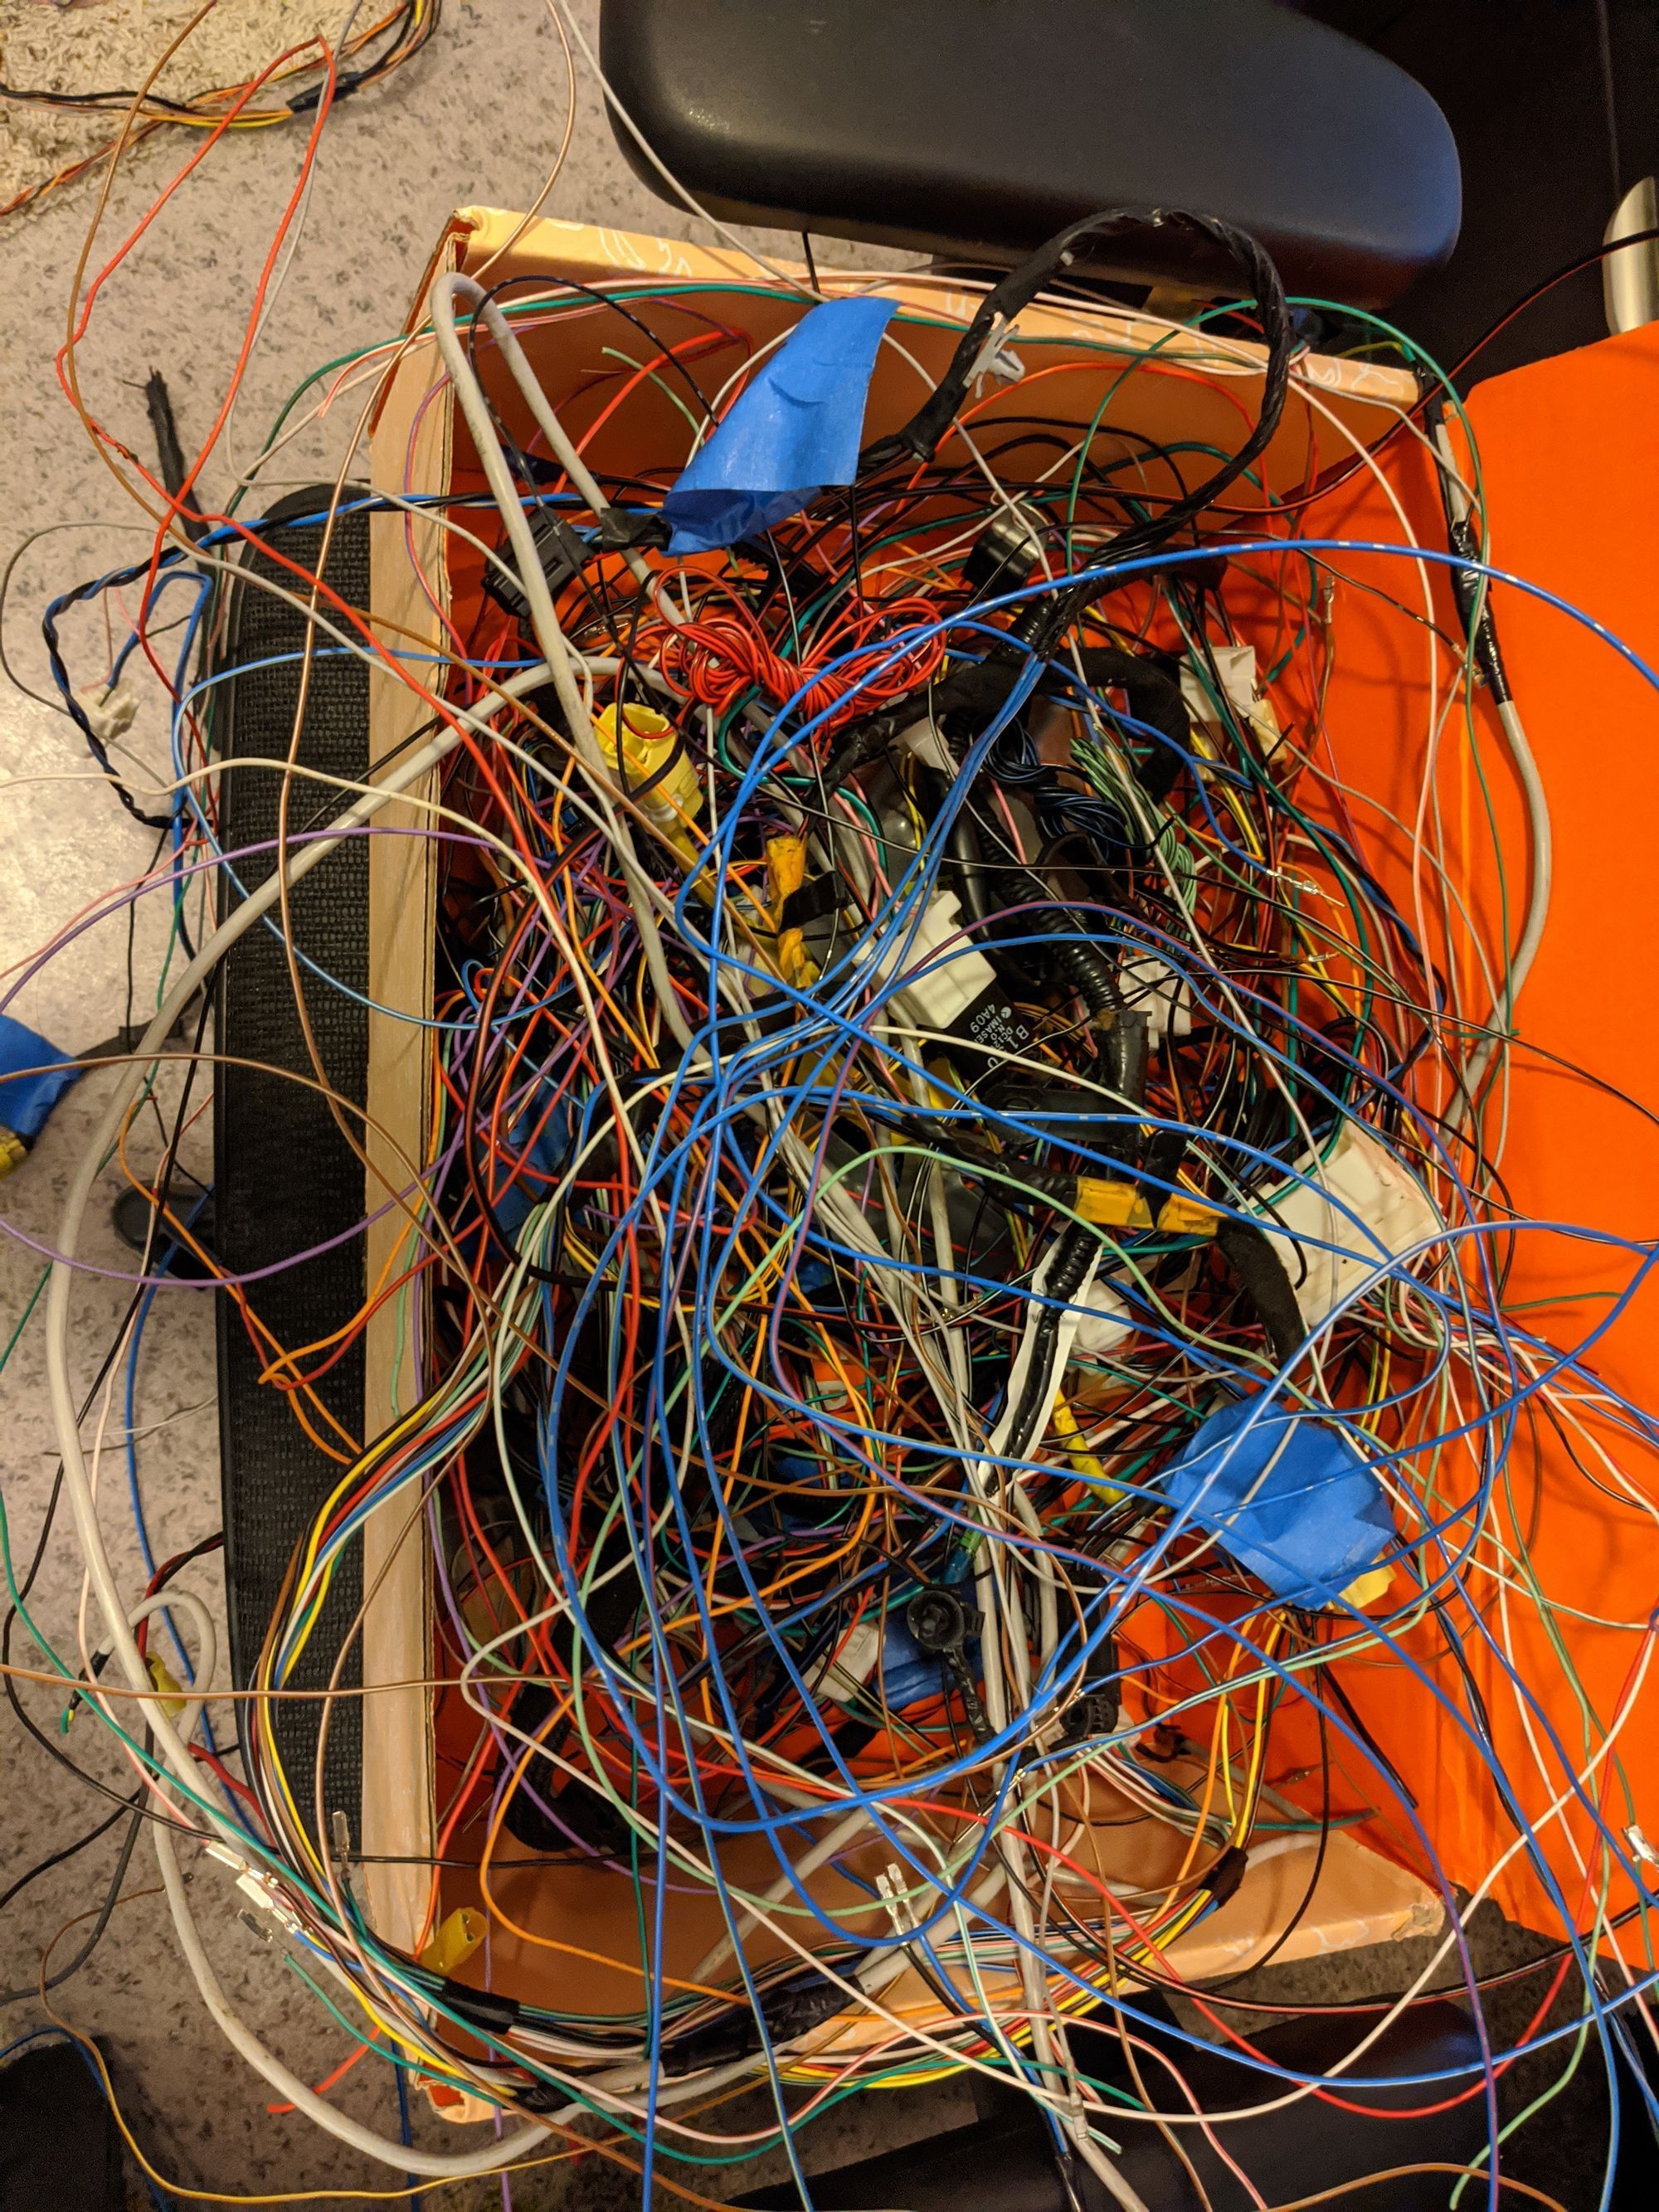 Wiring harness cleanup, round #1